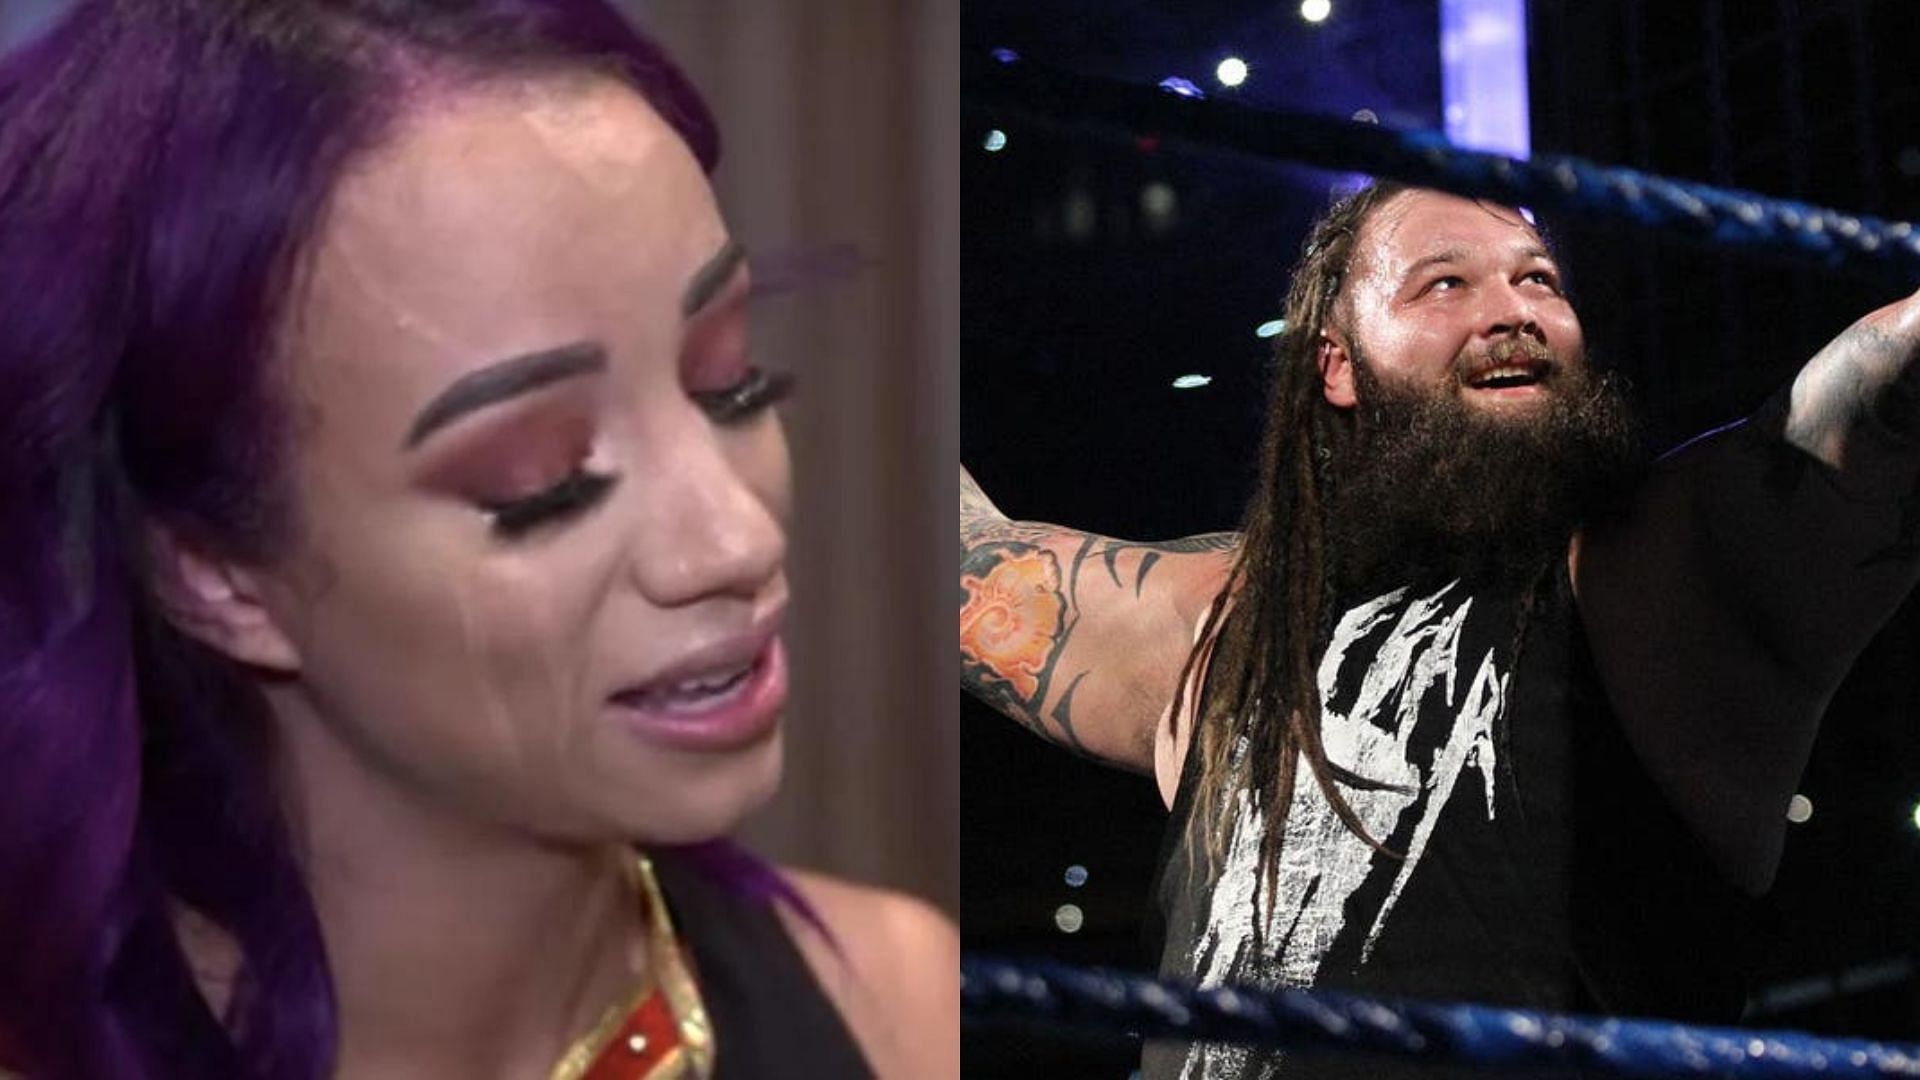 Mercedes Mone (Sasha Banks) sent out a message dedicated to the late Bray Wyatt